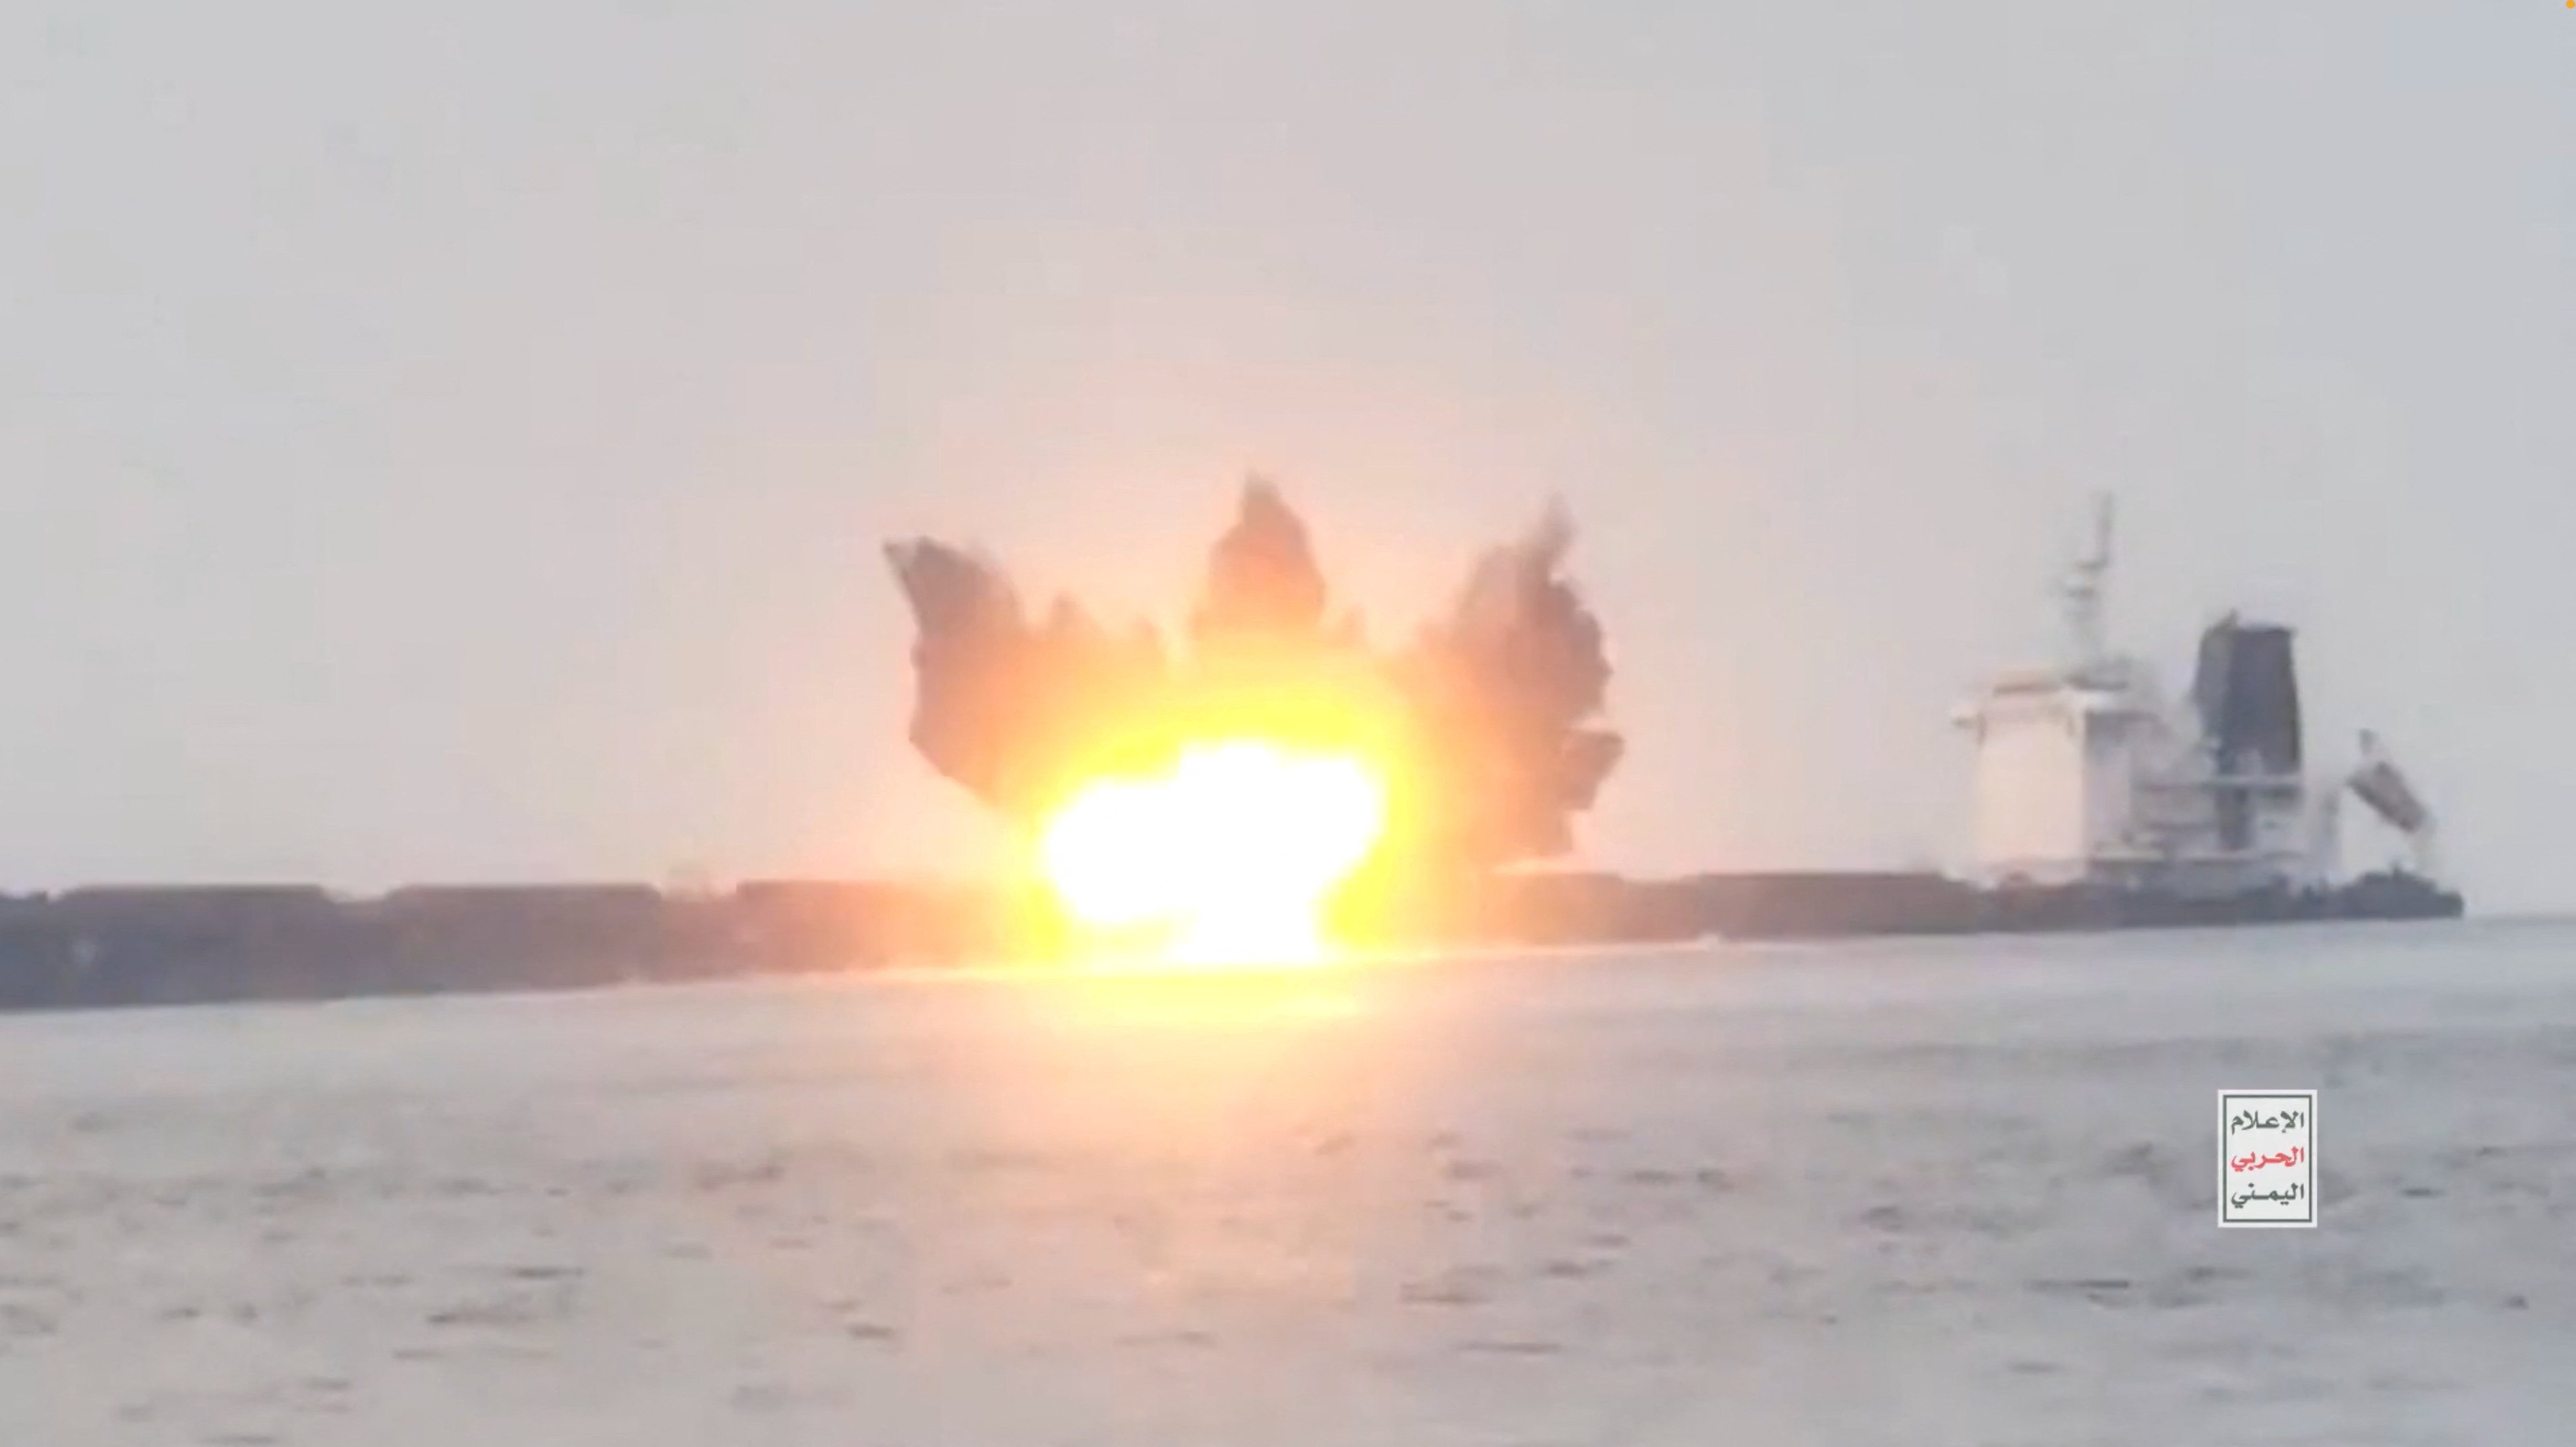 View of an explosion on a ship that Houthis say is an attack by them on Greek-owned MV Tutor in the Red Sea